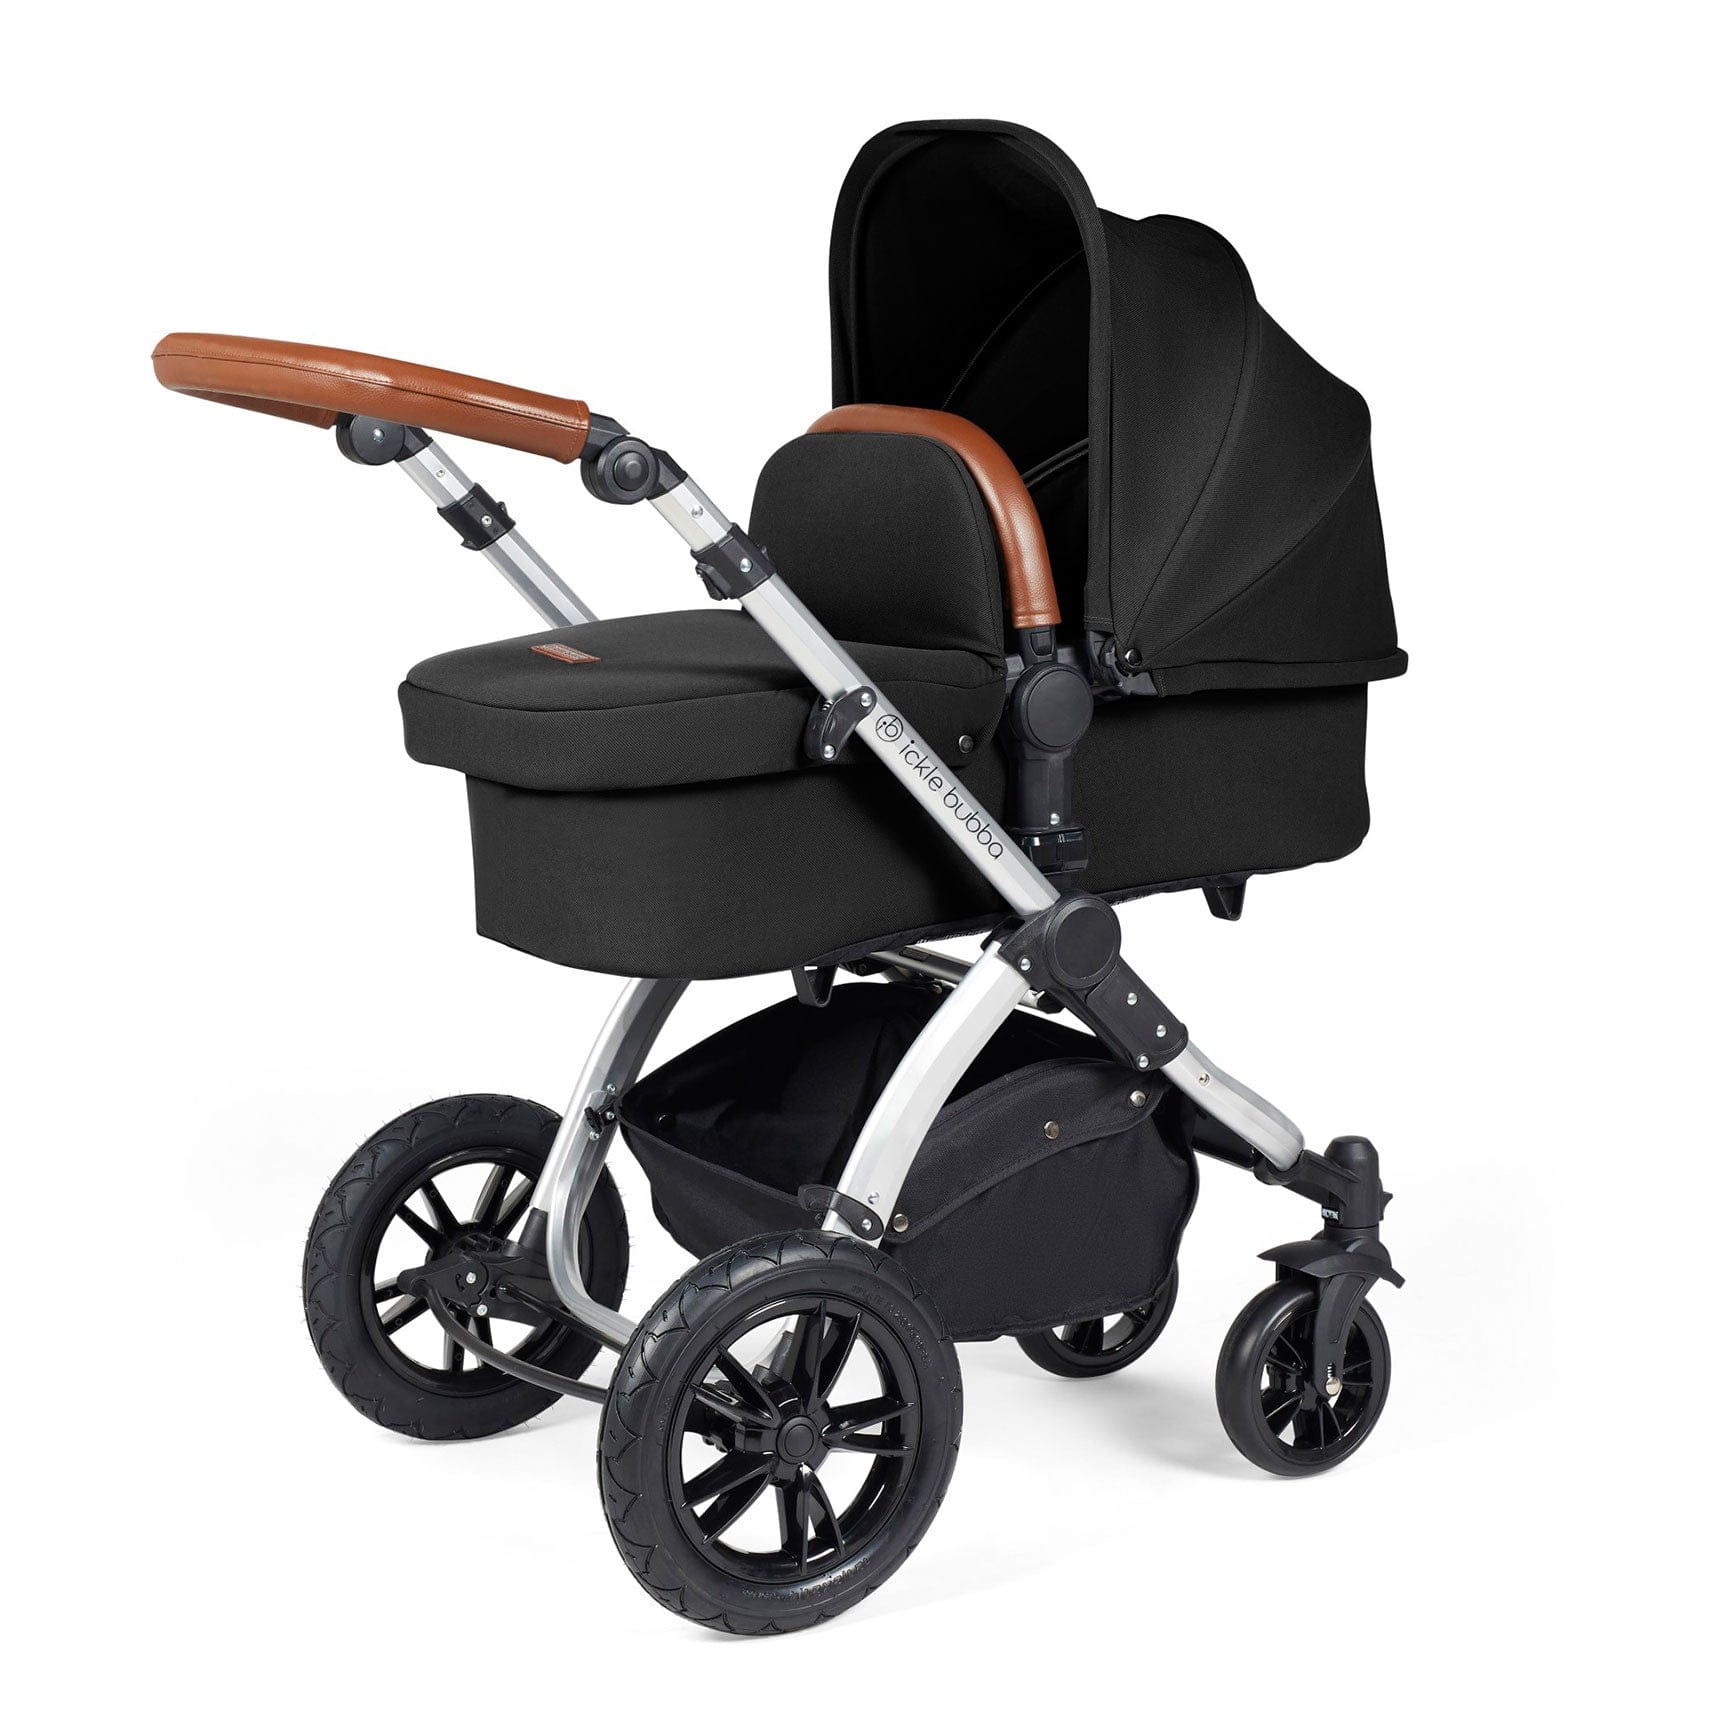 Ickle Bubba Stomp Luxe 2-in-1 Plus Pushchair & Carrycot in Silver/Midnight/Tan Travel Systems 10-003-001-250 5056515026283